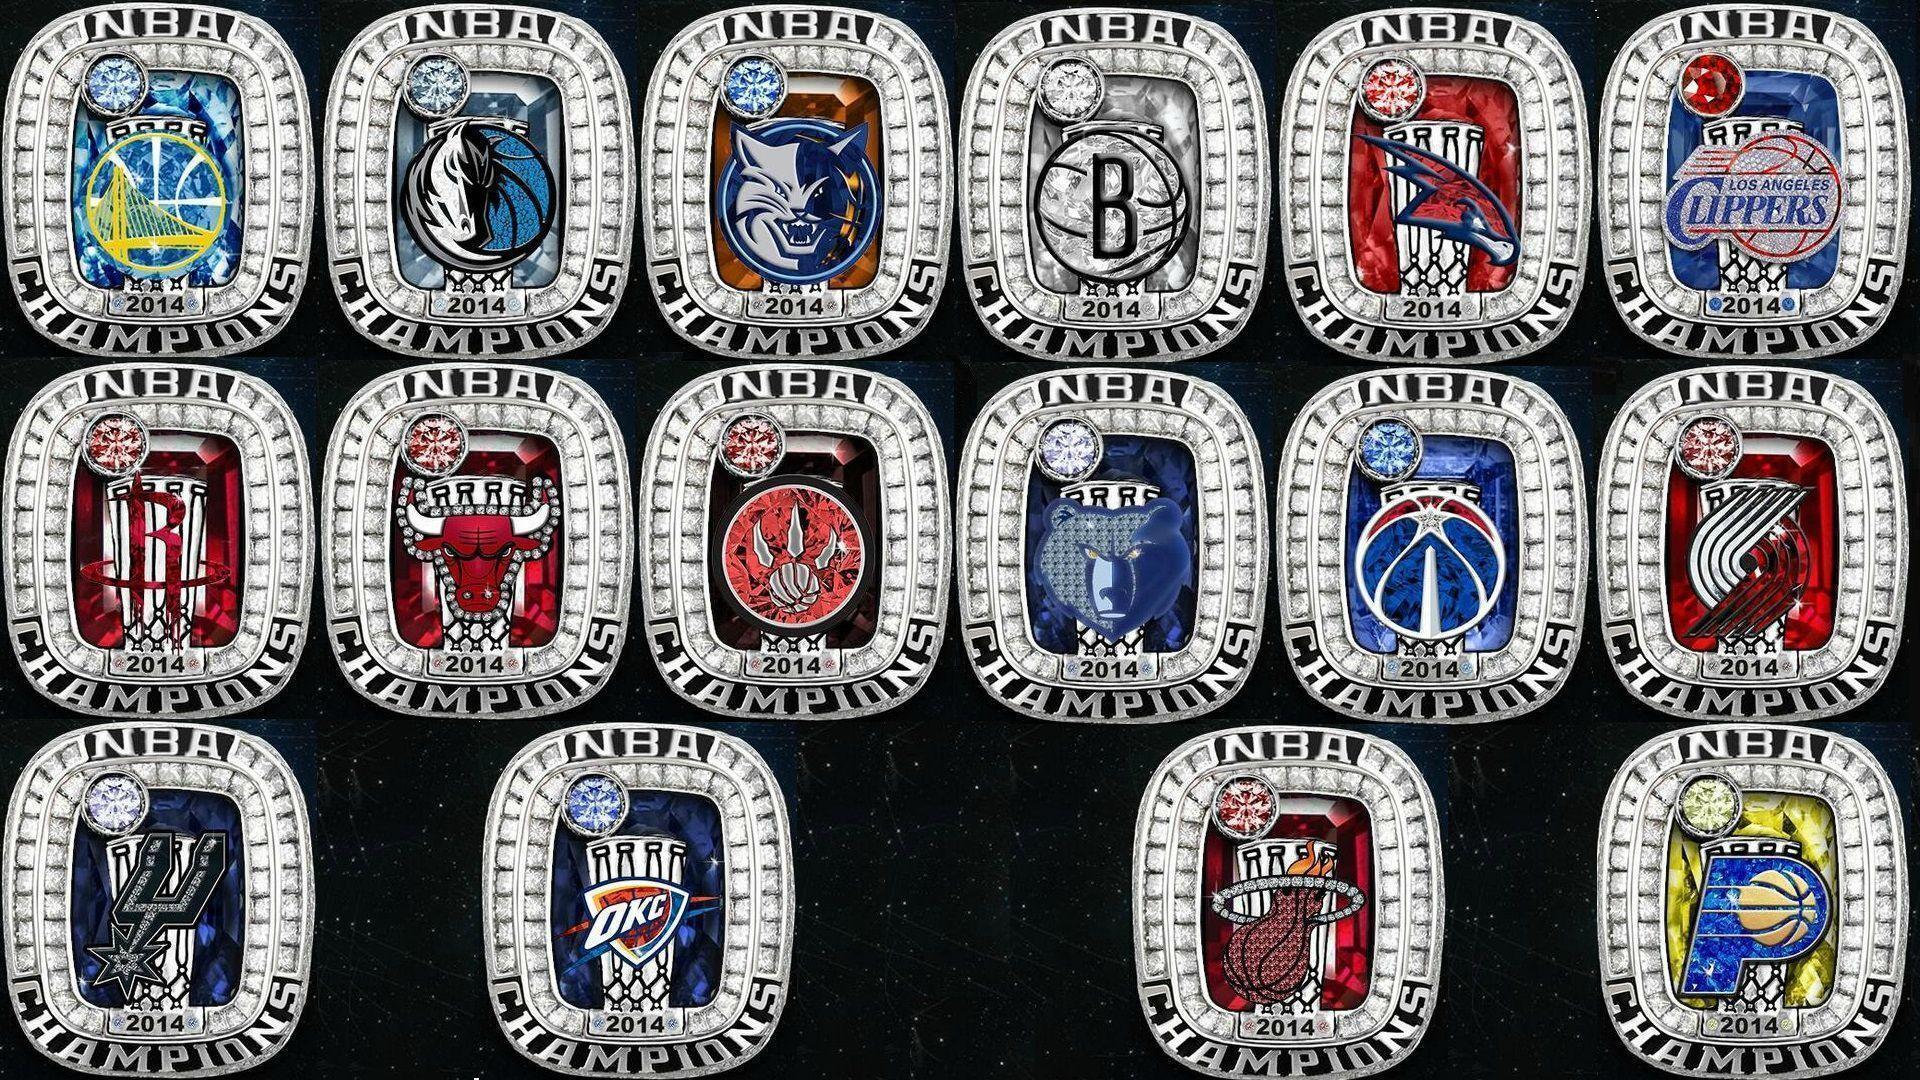 The NBA tweeted out 2014 championship rings for each team